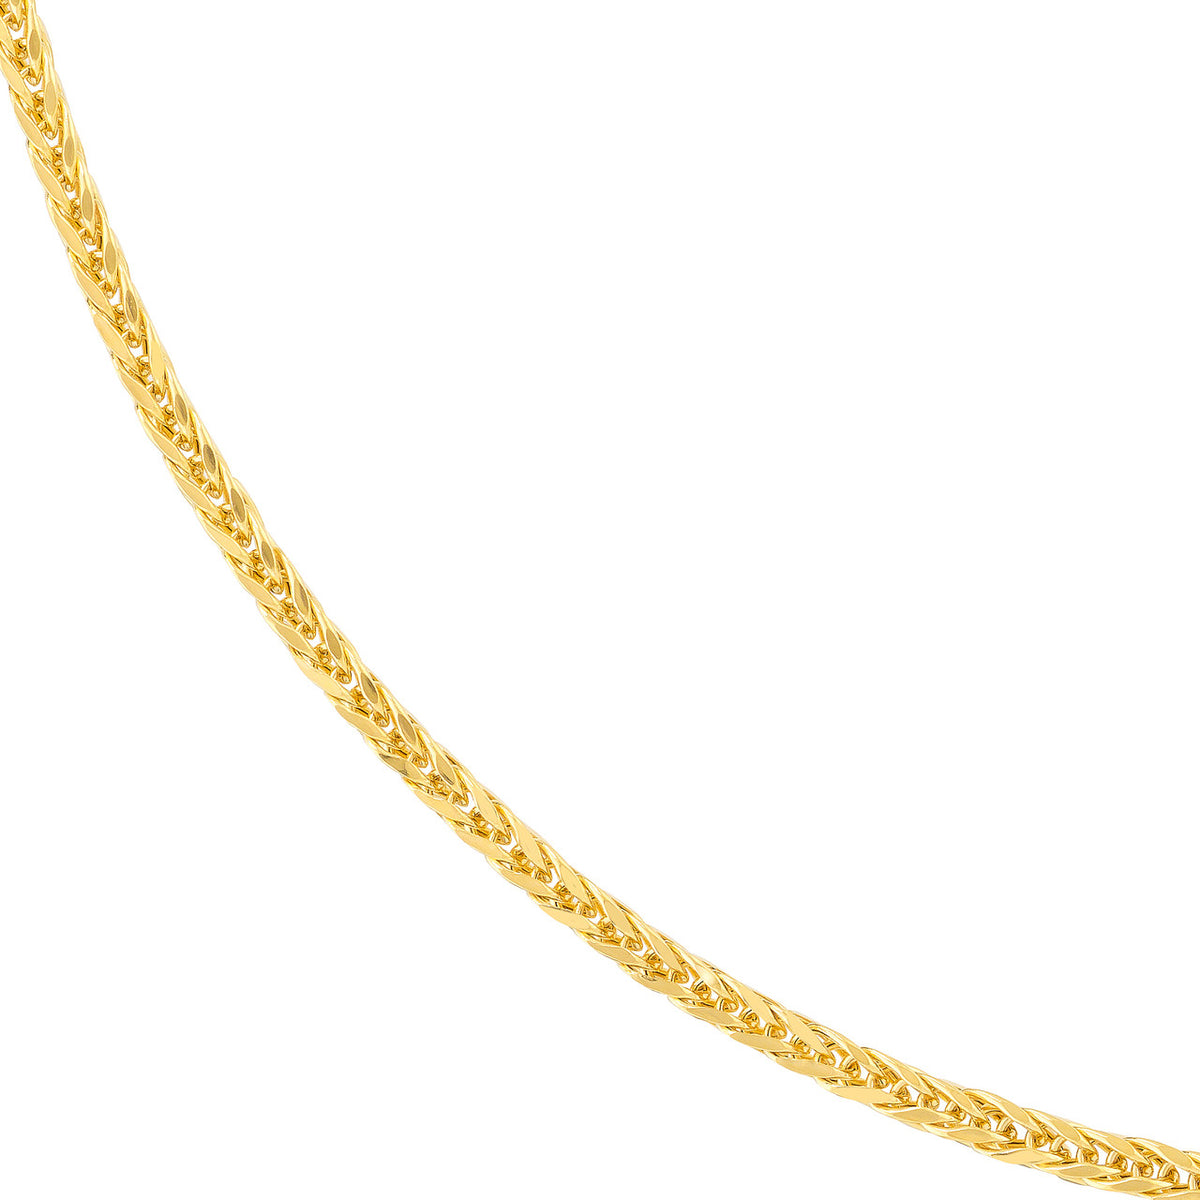 14K Yellow Gold or White Gold 2.25mm Square Wheat Chain Necklace with Lobster Lock